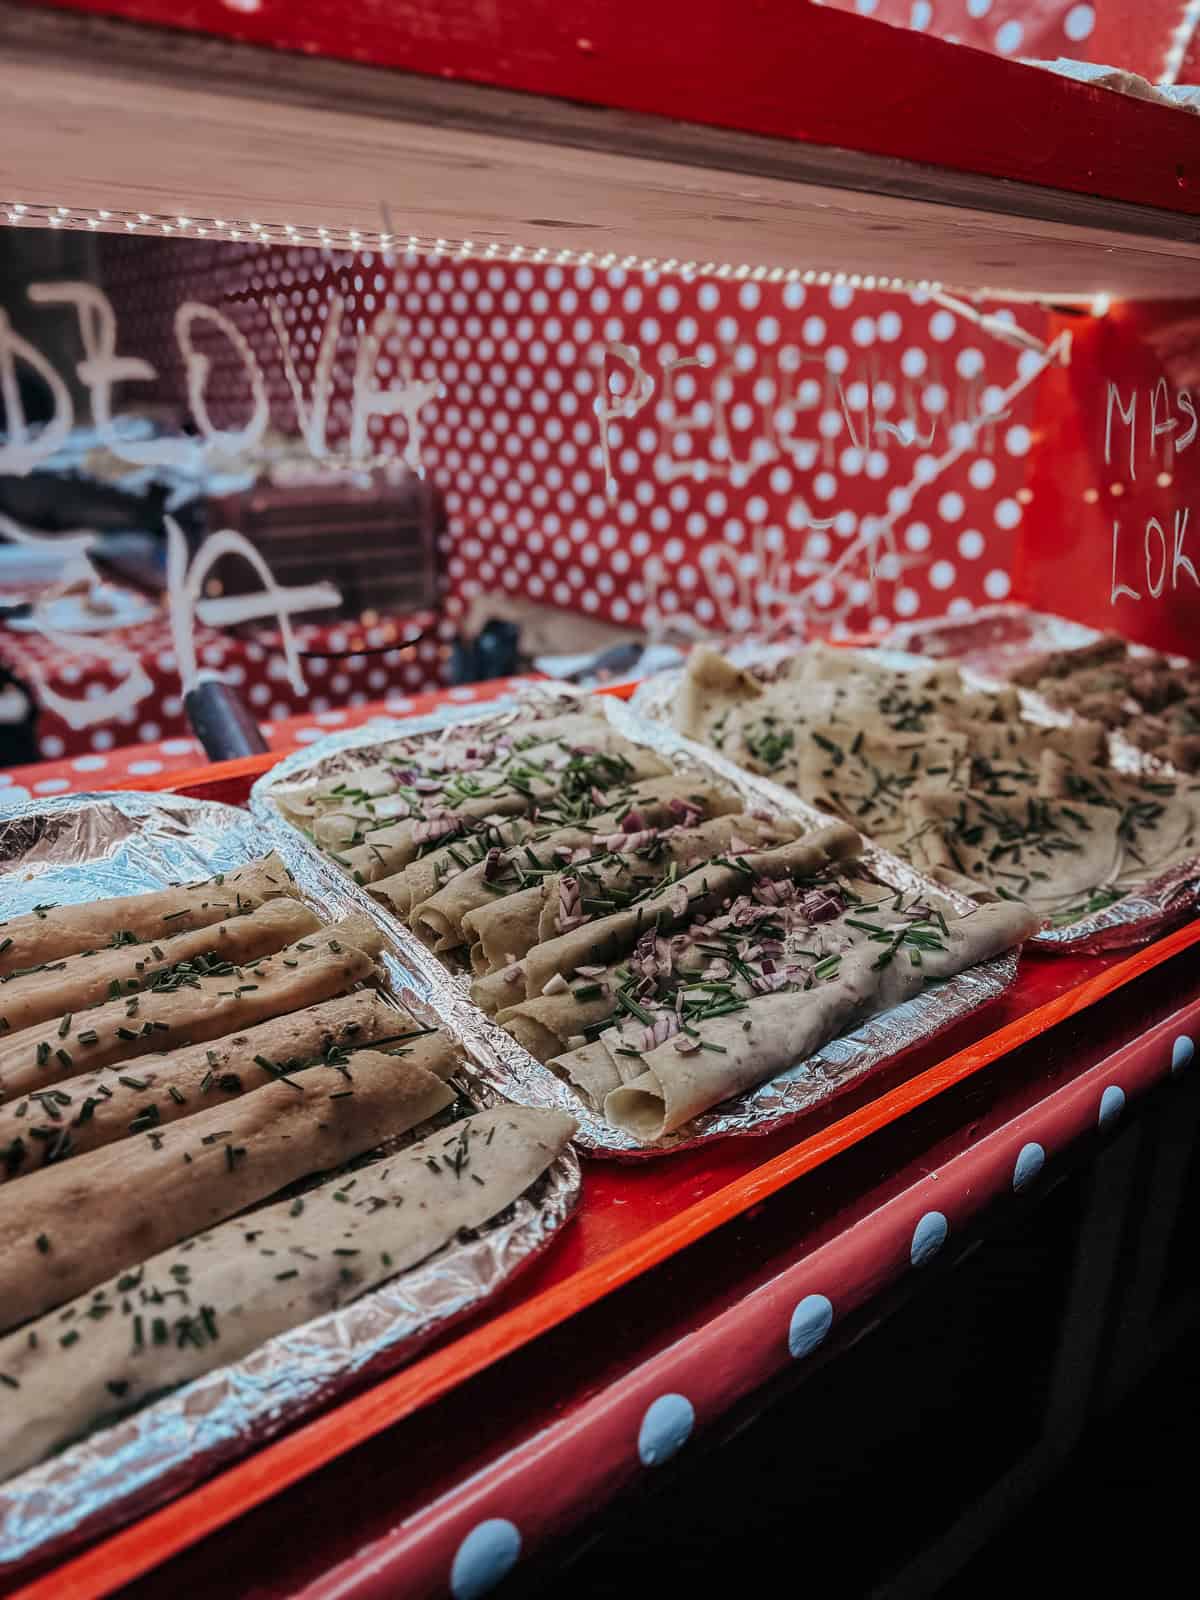 A close-up of a market stall displaying various traditional rolled pancakes garnished with herbs and onions.